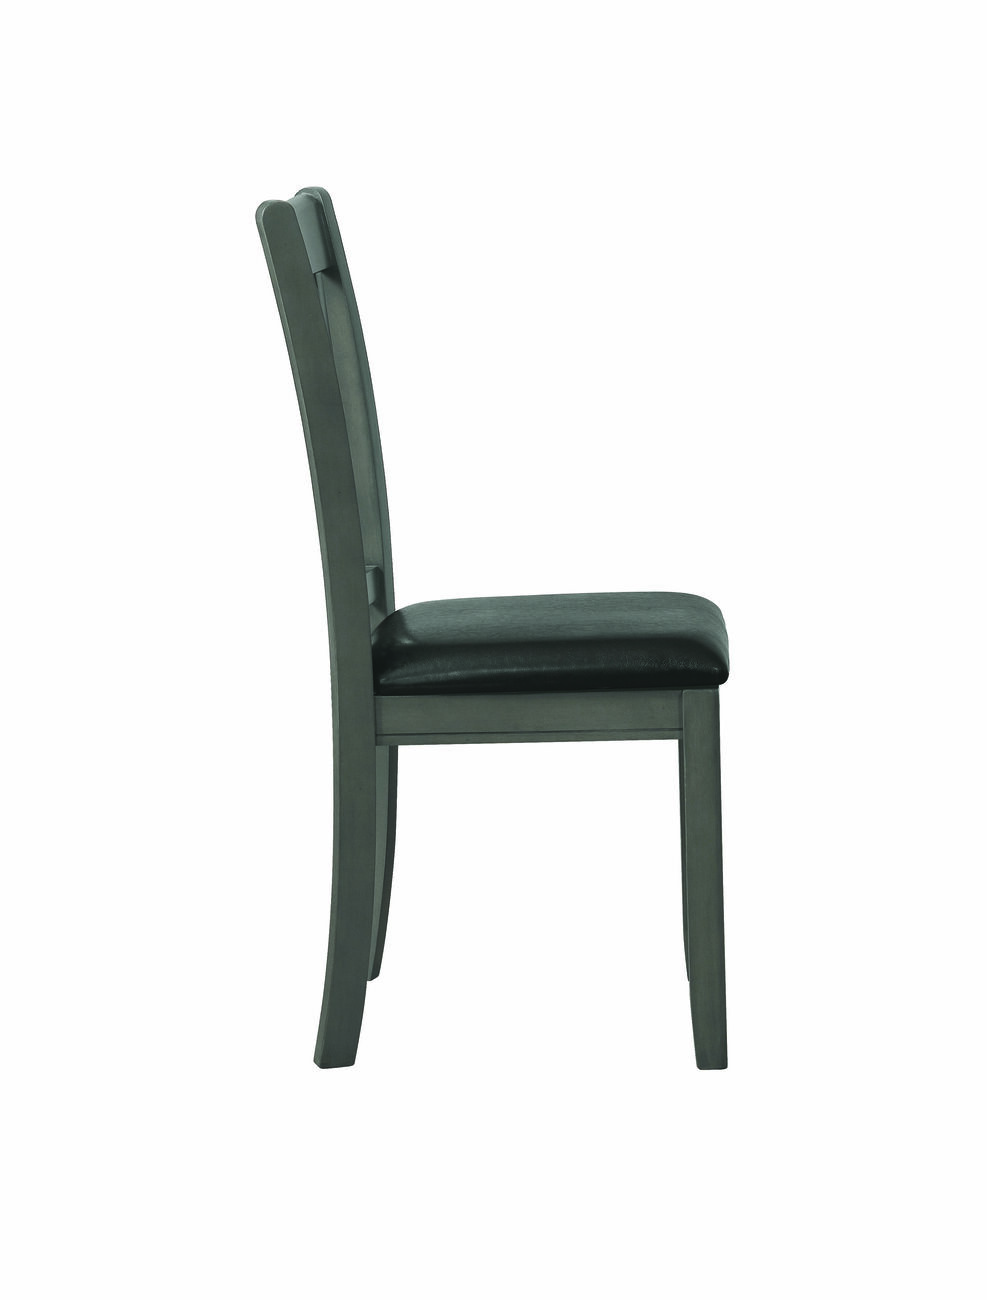 Cutout Back Wooden Dining Chair with Leatherette Seat, Gray and Black, Set of Two